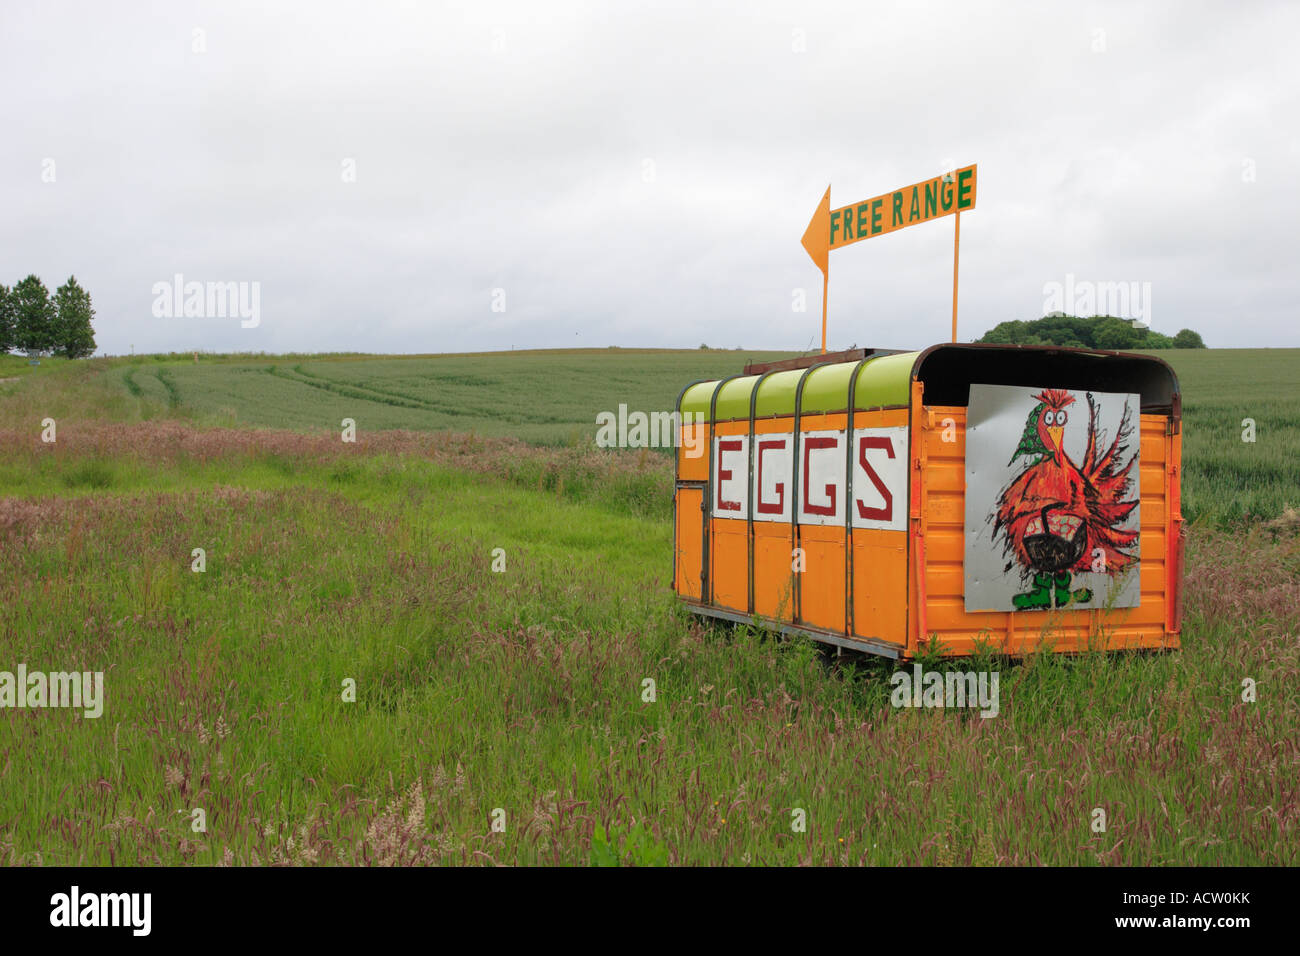 Free Range Eggs For Sale Sign Stock Photo